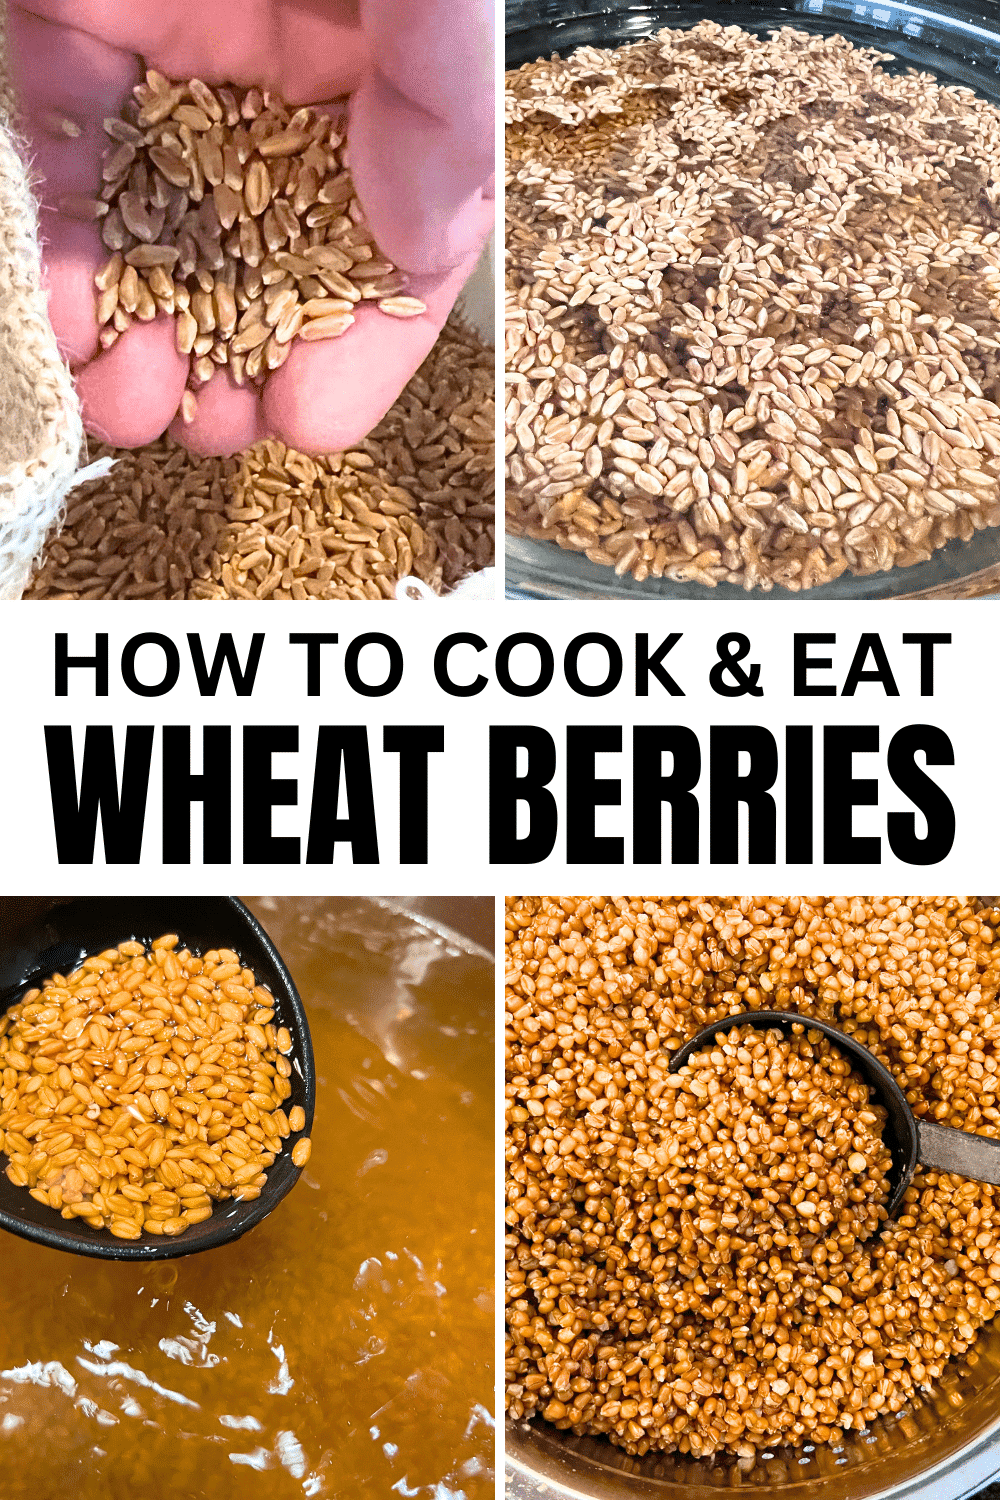 How To Cook Wheat Berries (And What To Do With Wheat Berry Recipes) - how to cook wheat berries step by step with text over the wheat berry pictures